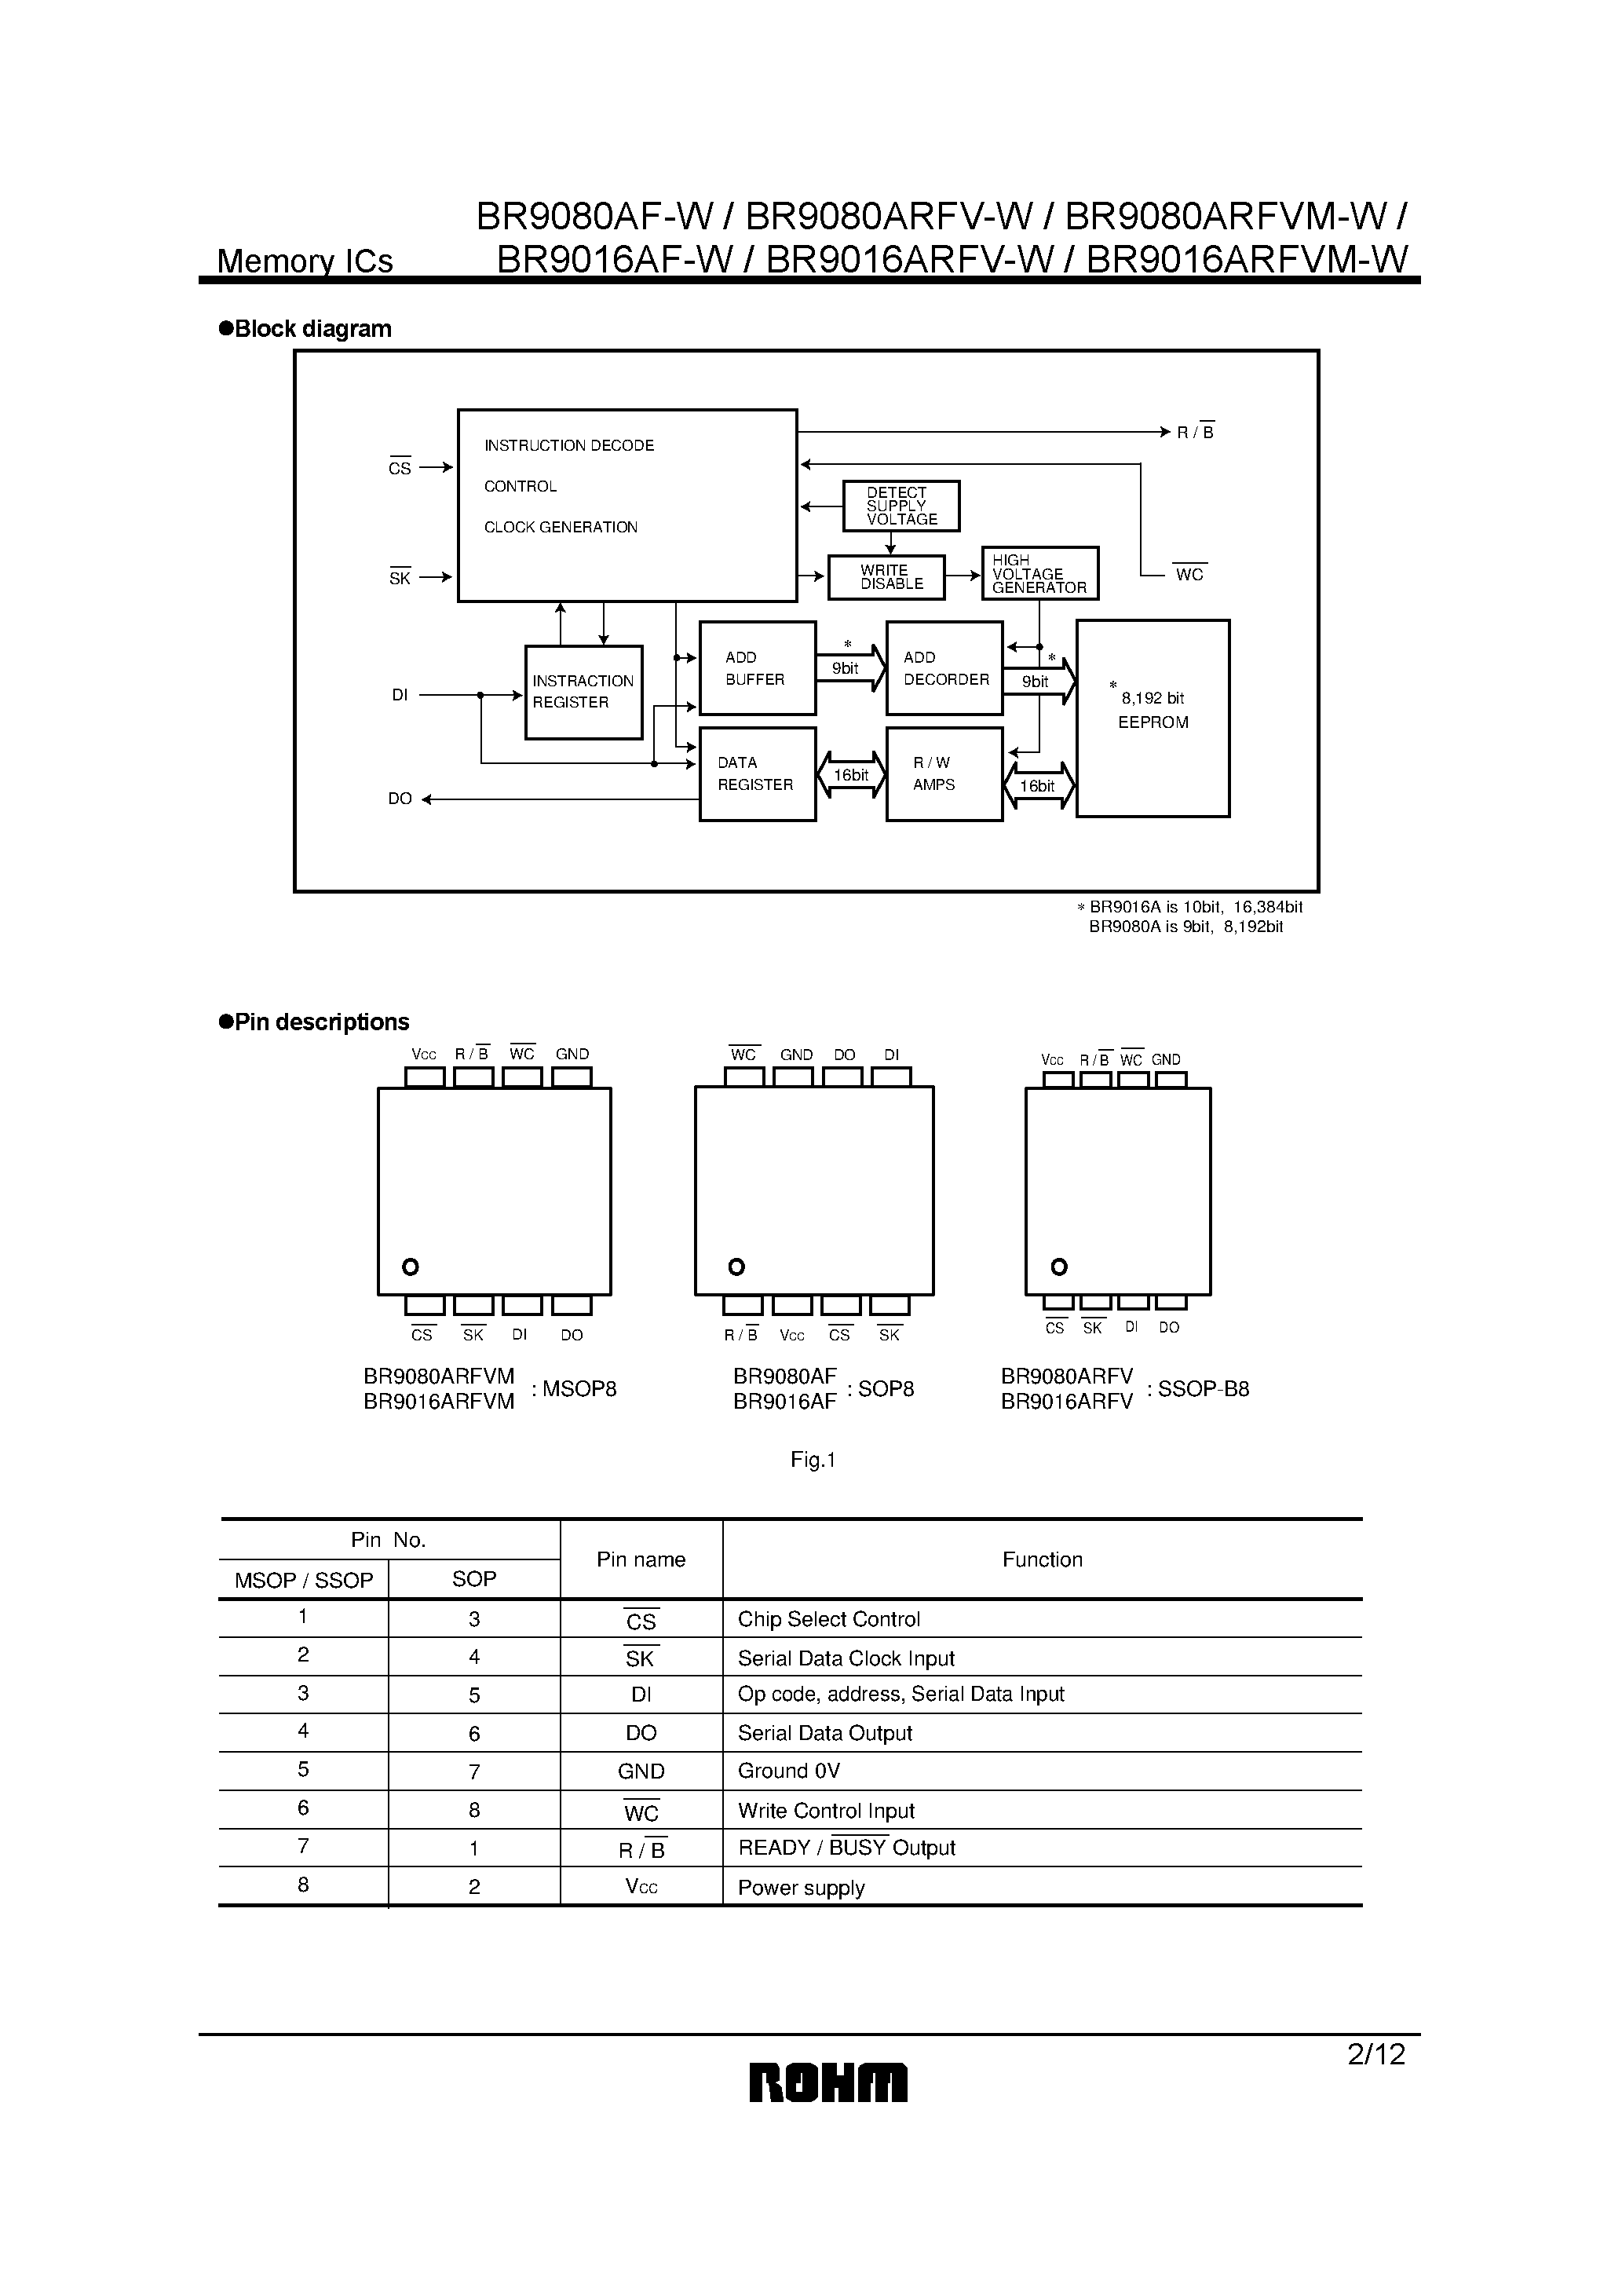 Datasheet BR9080ARFV-W - 8k/ 16k bit EEPROMs for direct connection to serial ports page 2